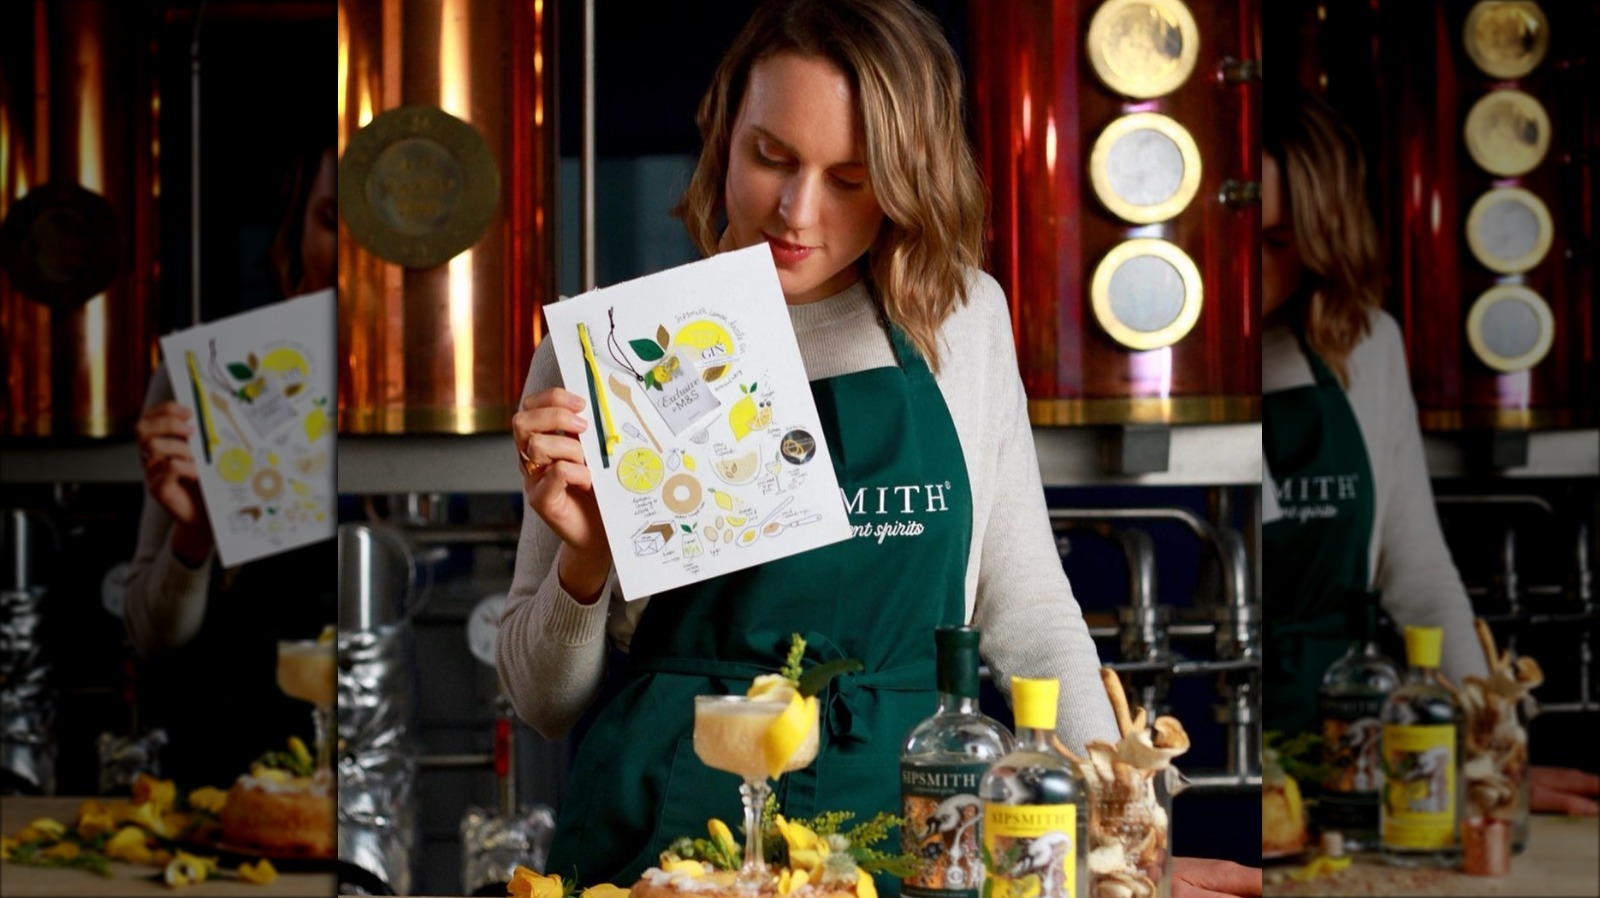 https://www.mashed.com/img/gallery/what-great-british-bake-off-winner-frances-quinn-is-up-to-now/l-intro-1611073956.jpg